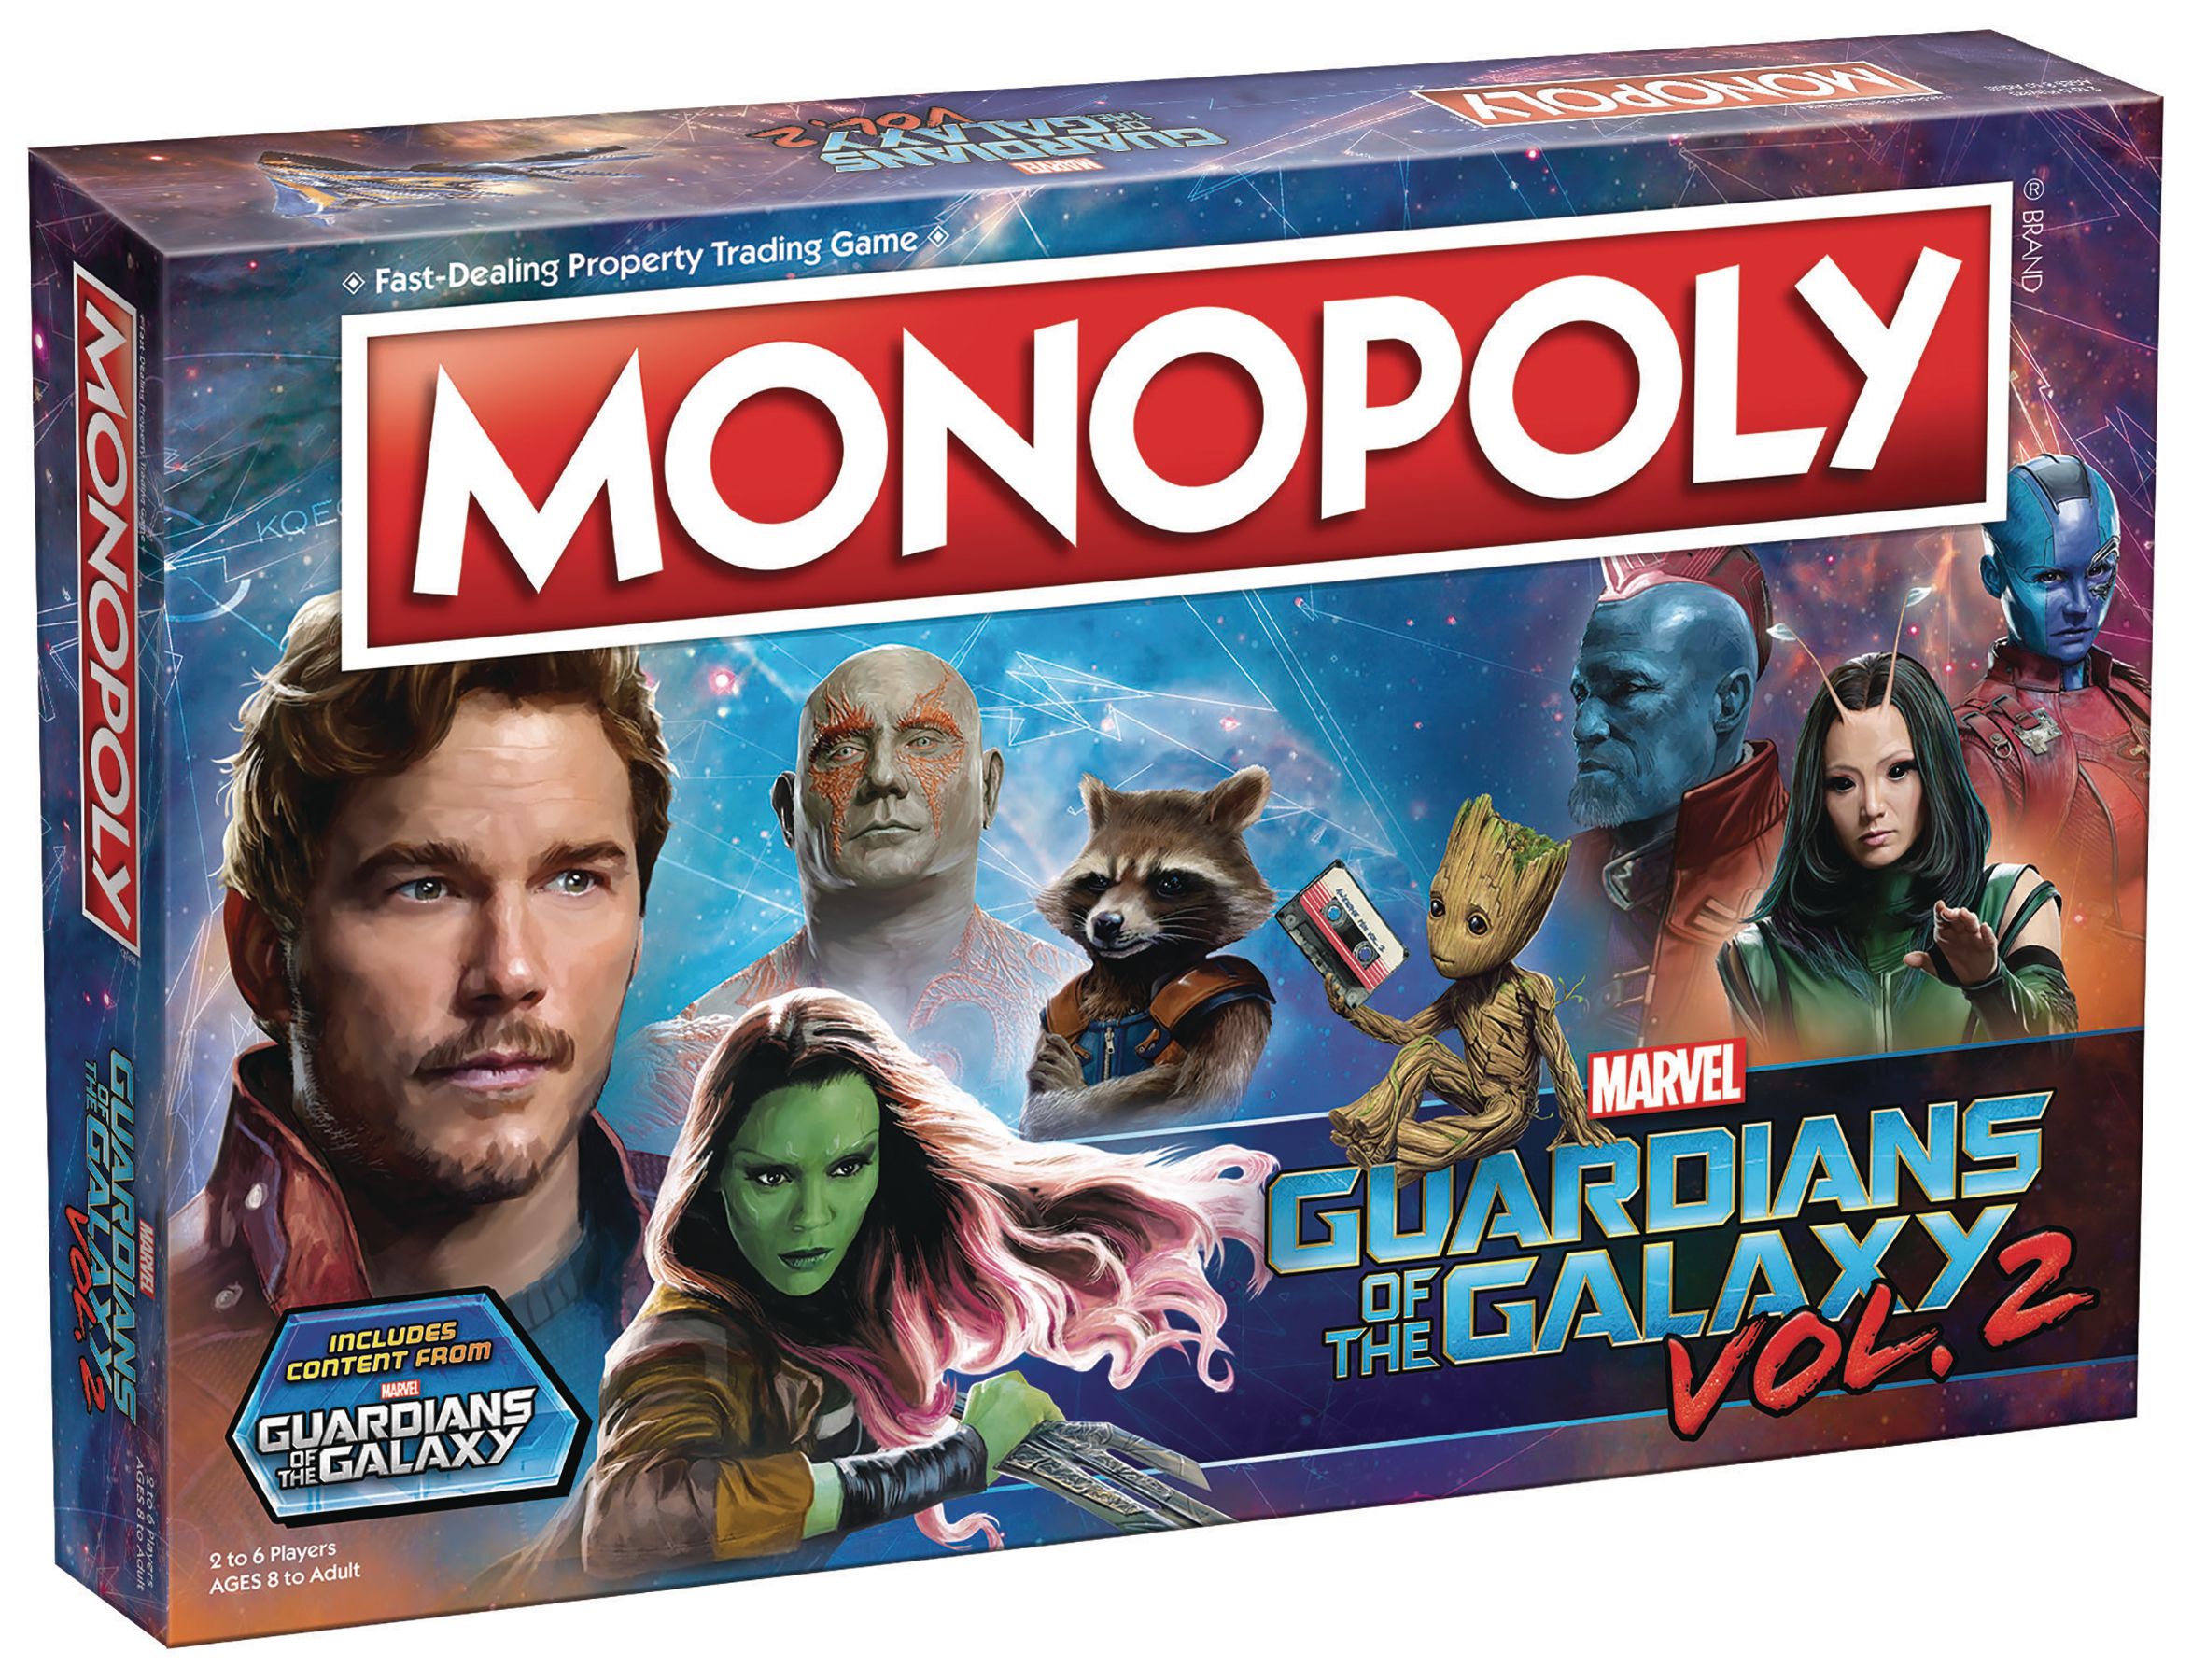 GUARDIANS OF THE GALAXY VOL. 2 MONOPOLY